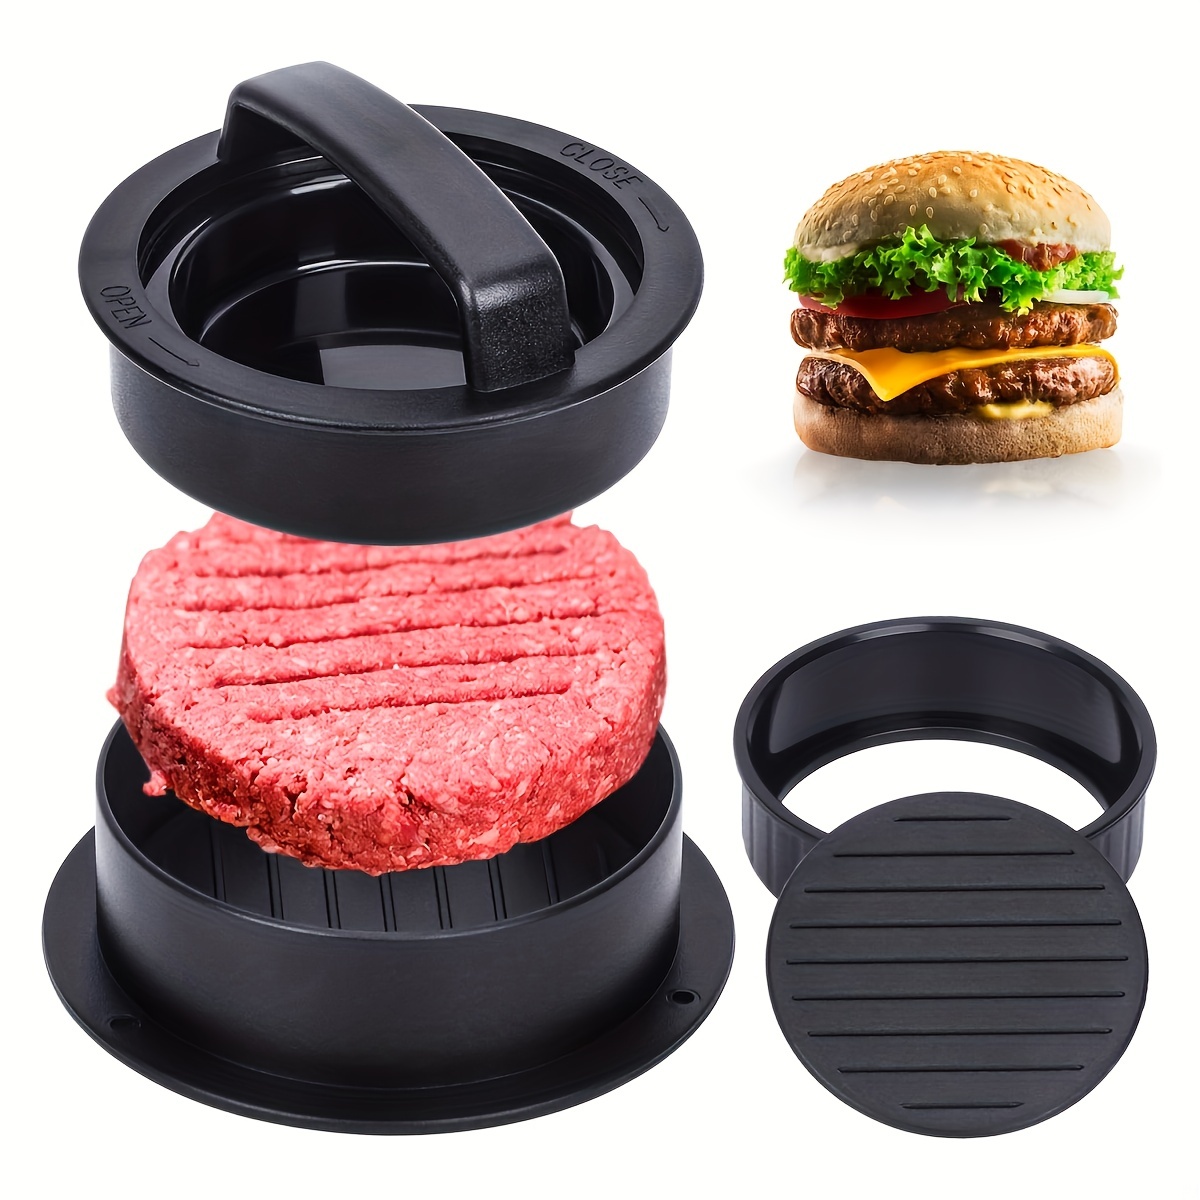 Burger Press 2 Pack, Stainless Steel Hamburger Press, 5.5 Round & Square  Smash Burger Press for Bacon, Steak, Sandwich, Non-Stick Burger Hamburger  Smasher Tool for Flat Top Griddle $18.88, FREE FOR